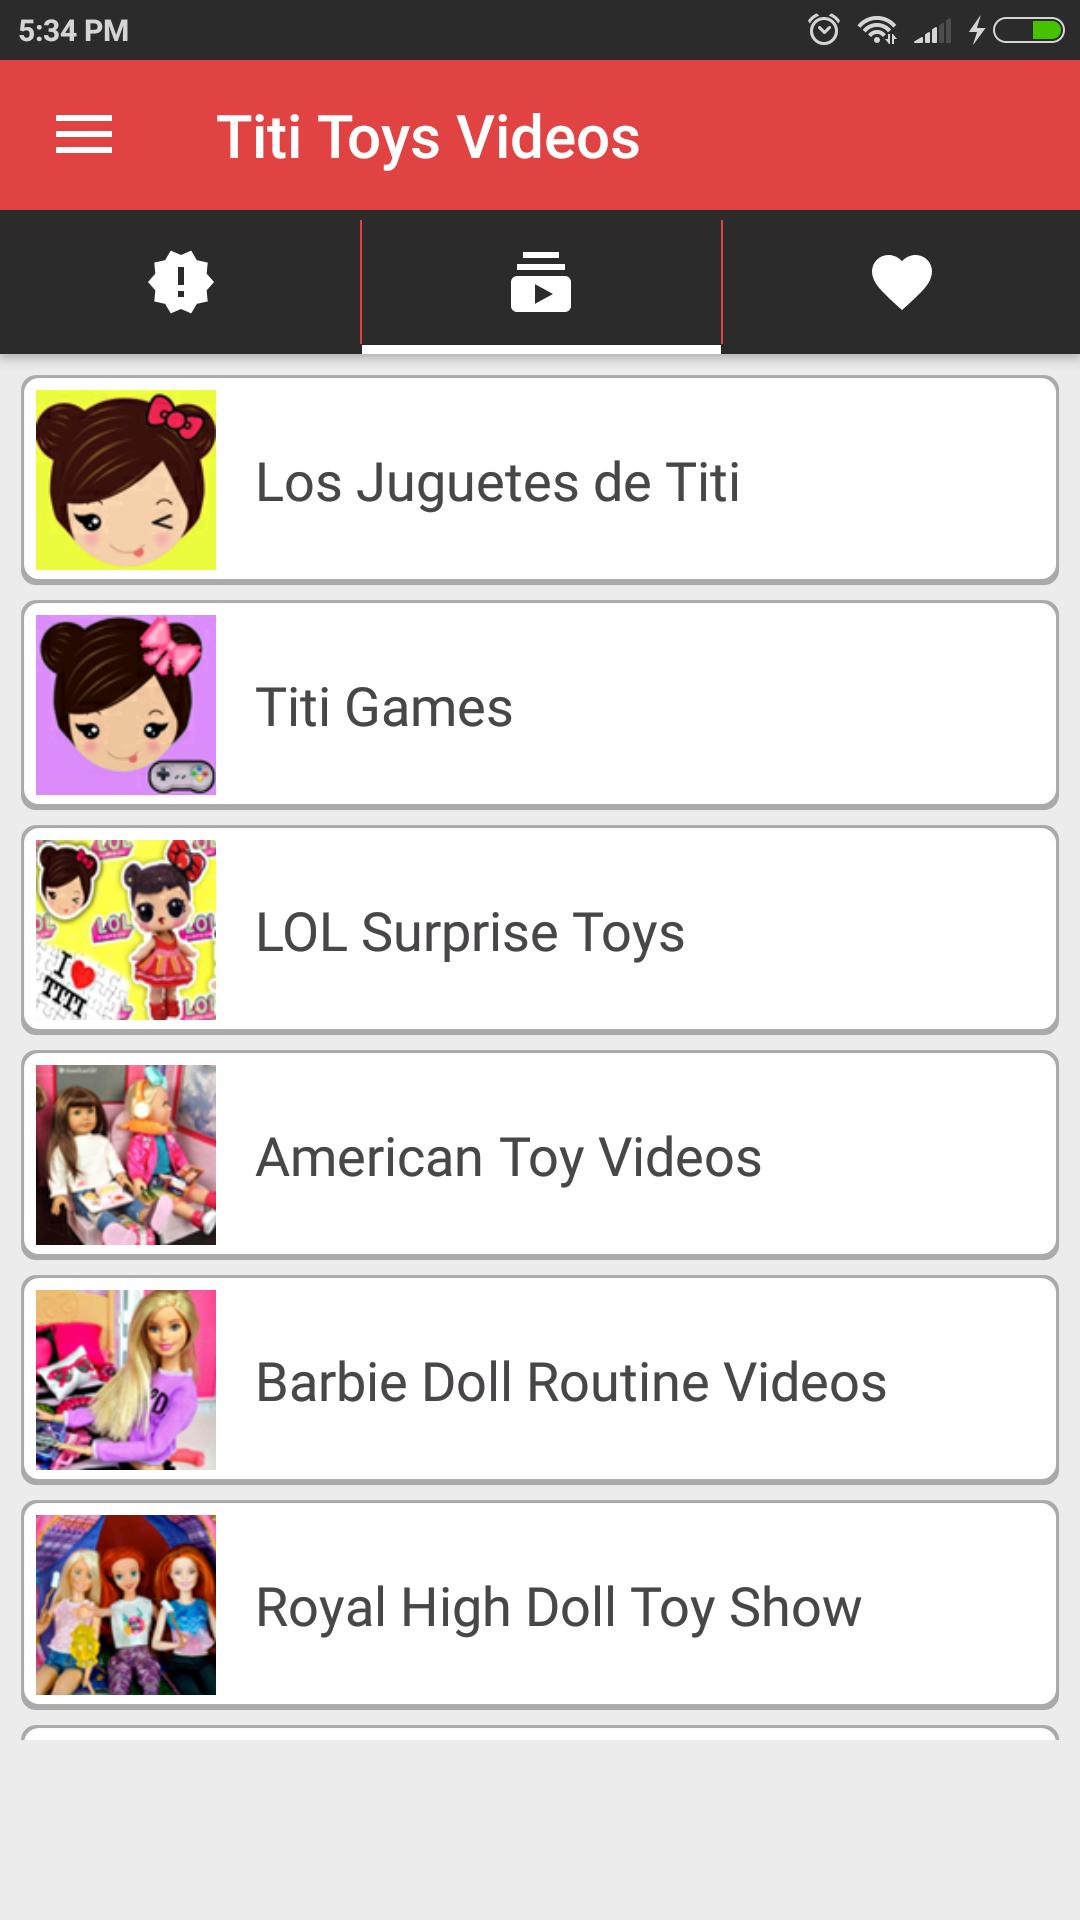 Titi Toys And Dolls Videos for Android - APK Download